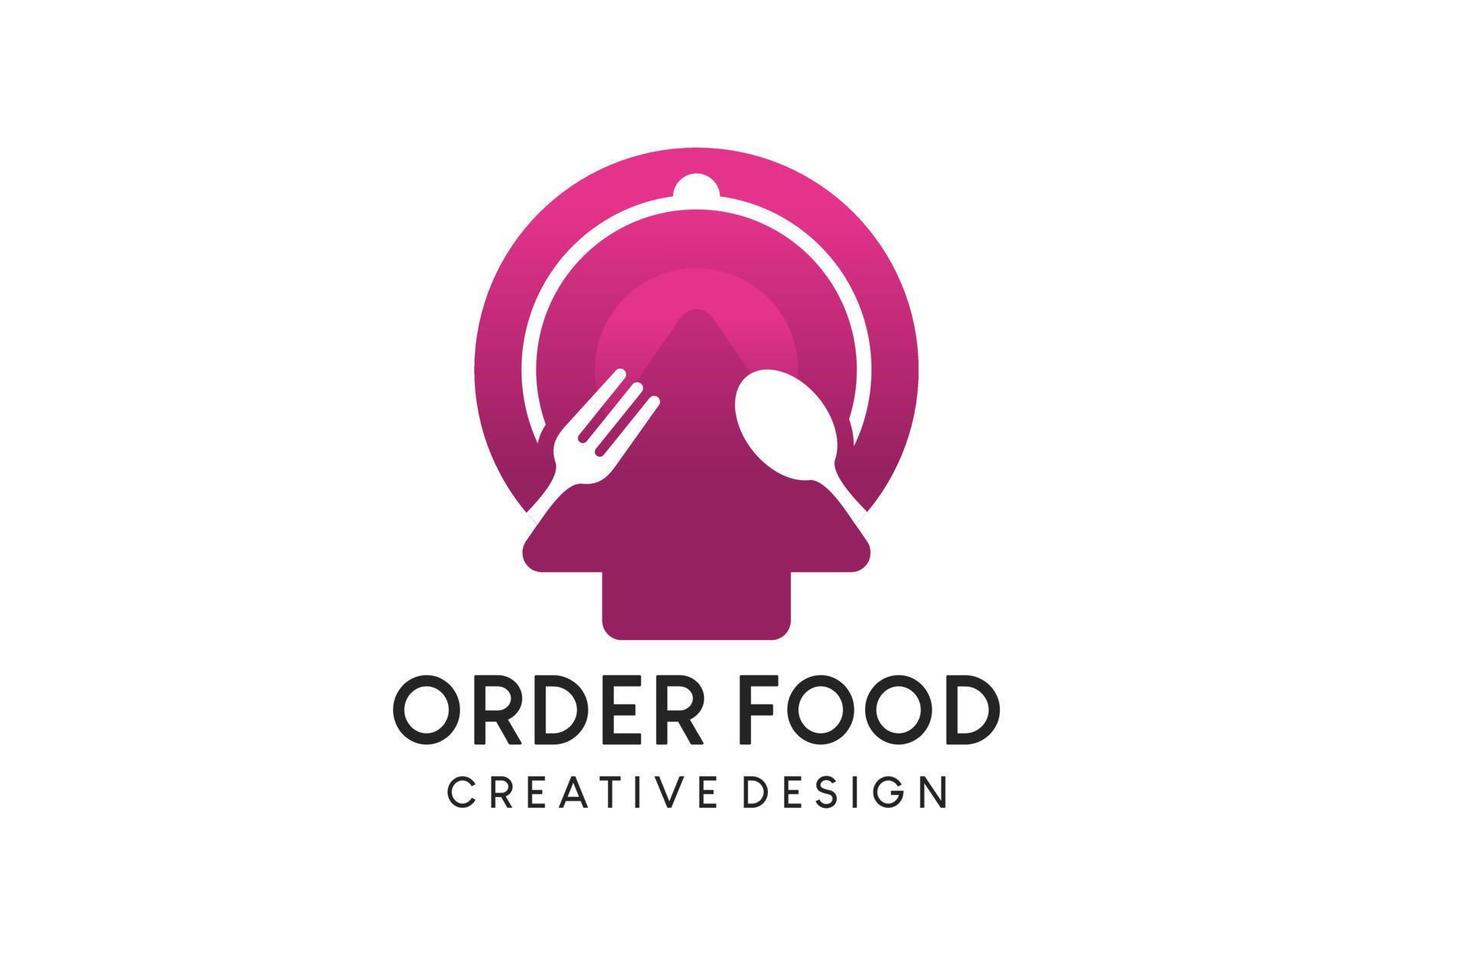 Online food logo design, food order logo vector illustration with cutlery and arrow icon concept